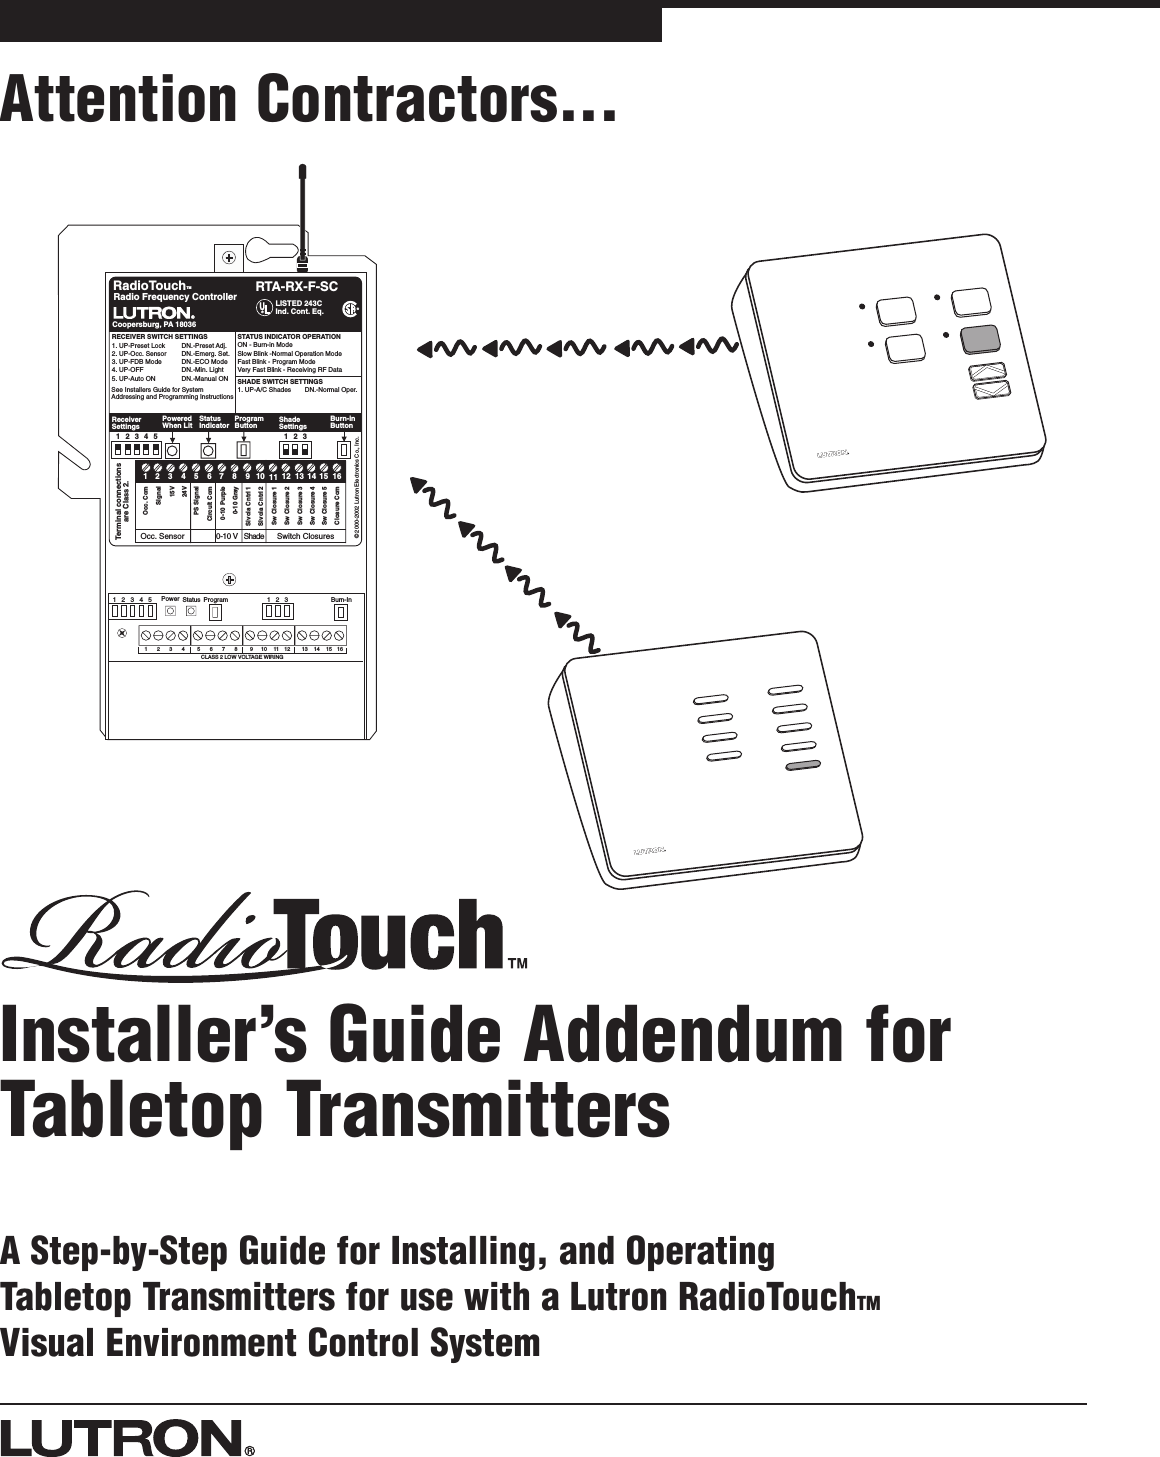 Attention Contractors...Installer’s Guide Addendum forTabletop TransmittersA Step-by-Step Guide for Installing, and Operating Tabletop Transmitters for use with a Lutron RadioTouchTMVisual Environment Control System1234 5678 9101112 13141516CLASS 2 LOW VOLTAGE WIRING12345 Power Status Program Burn-In123Sivoia Cntrl 1Sivoia Cntrl 2RTA-RX-F-SCRadio Frequency Controller LISTED 243CInd. Cont. Eq.Coopersburg, PA 18036STATUS INDICATOR OPERATIONON - Burn-in ModeSlow Blink -Normal Operation ModeFast Blink - Program ModeVery Fast Blink - Receiving RF DataRadioTouch1234567891011 12 13 14 15 16Occ. ComSignal15V24VCircuit ComSw Closure 1Sw Closure 2Sw Closure 3Sw Closure 4Sw Closure 5Closure Com0-10 Purple0-10 GrayReceiverSettingsTerminal connectionsare Class 2.TMOcc. Sensor 0-10 V Shade Swit c h  C losures12345PoweredWhen LitStatusIndicatorProgramButtonBurn-inButtonRECEIVER SWITCH SETTINGS1. UP-Preset Lock DN.-Preset Adj.2. UP-Occ. Sensor DN.-Emerg. Set.3. UP-FDB Mode DN.-ECO Mode4. UP-OFF DN.-Min. Light5. UP-Auto ON DN.-Manual ONSee Installers Guide for SystemAddressing and Programming Instructions®123ShadeSettingsSHADE SWITCH SETTINGS1. UP-A/C Shades DN.-Normal Oper.PS Signal© 2000-2002 Lutron Electronics Co., Inc.